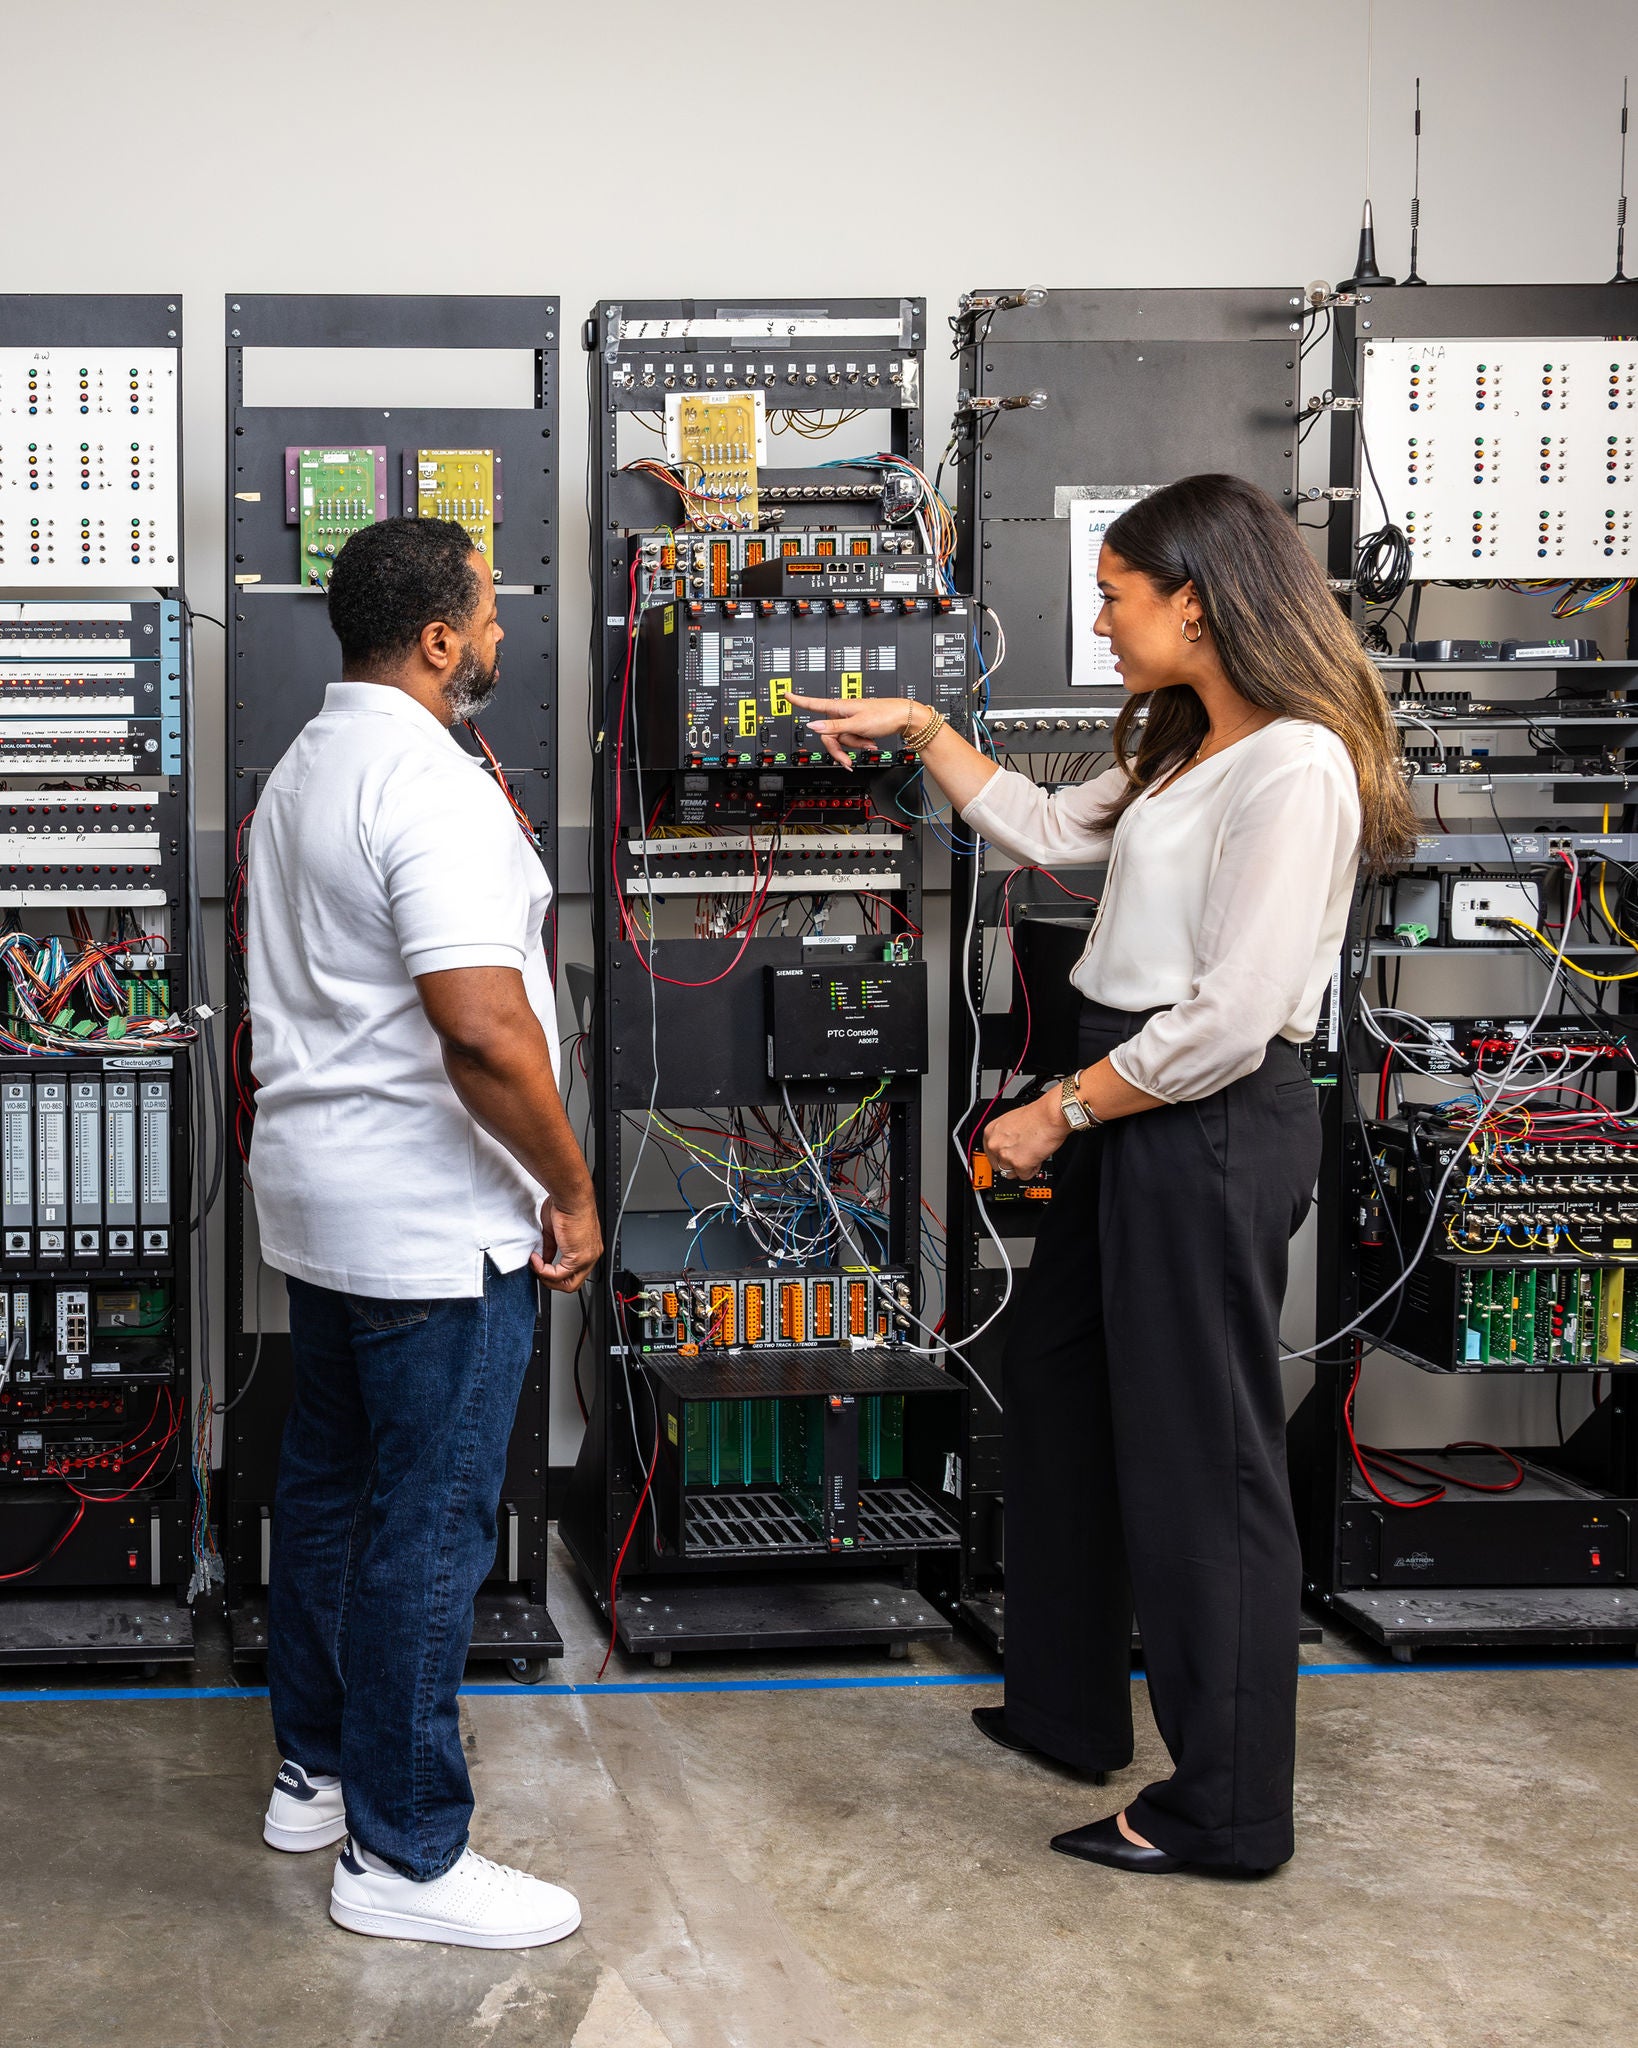 A man and women in the transportation industry look at a server